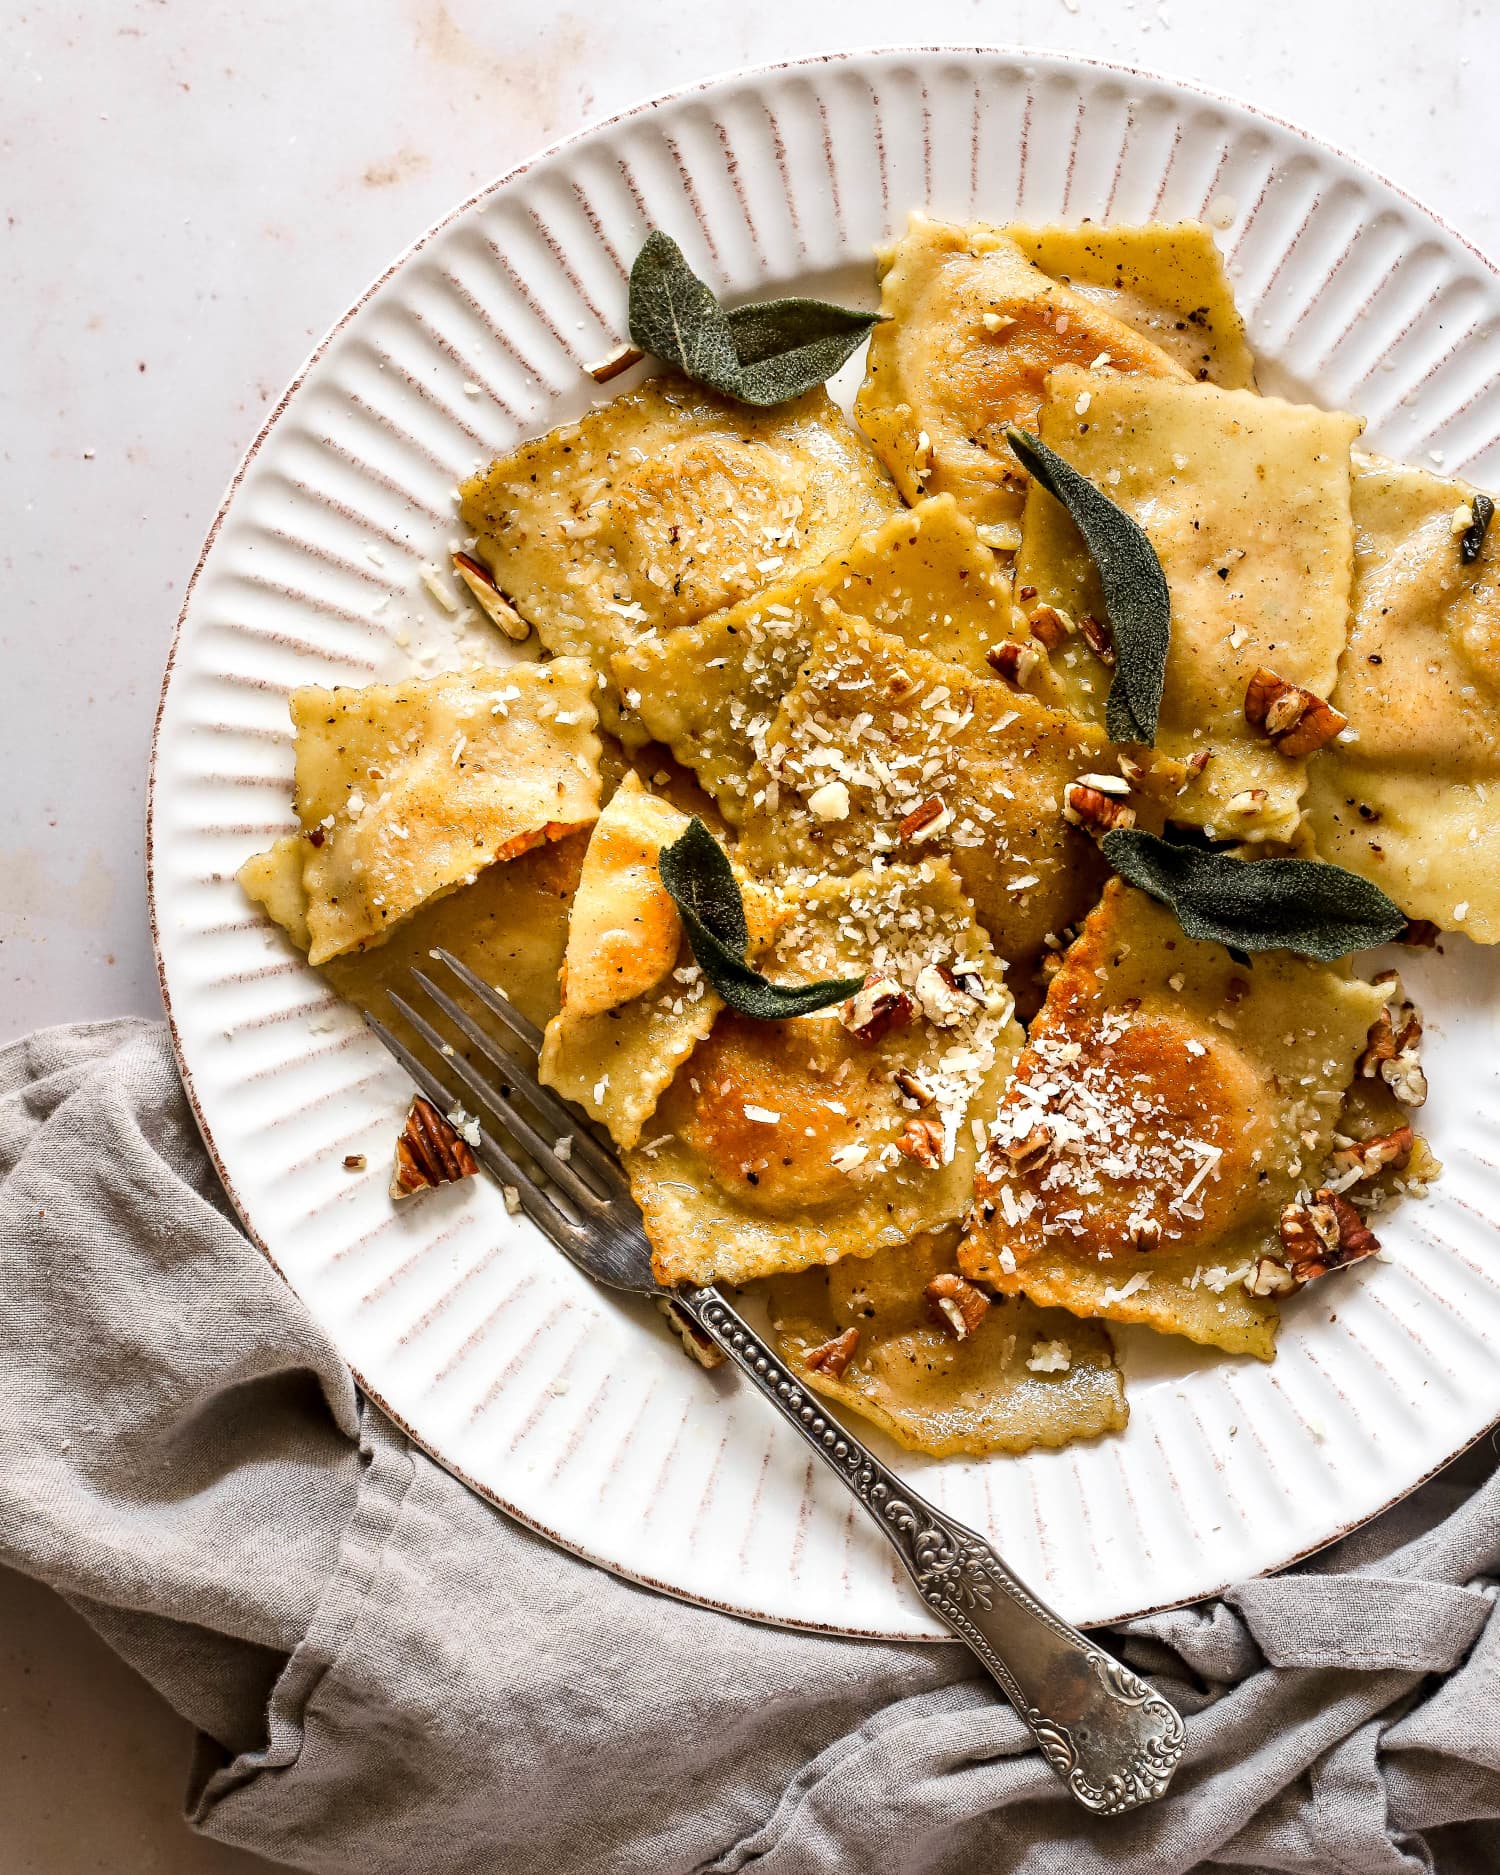 Pumpkin Ravioli with Brown Butter Is the Coziest Fall Meal